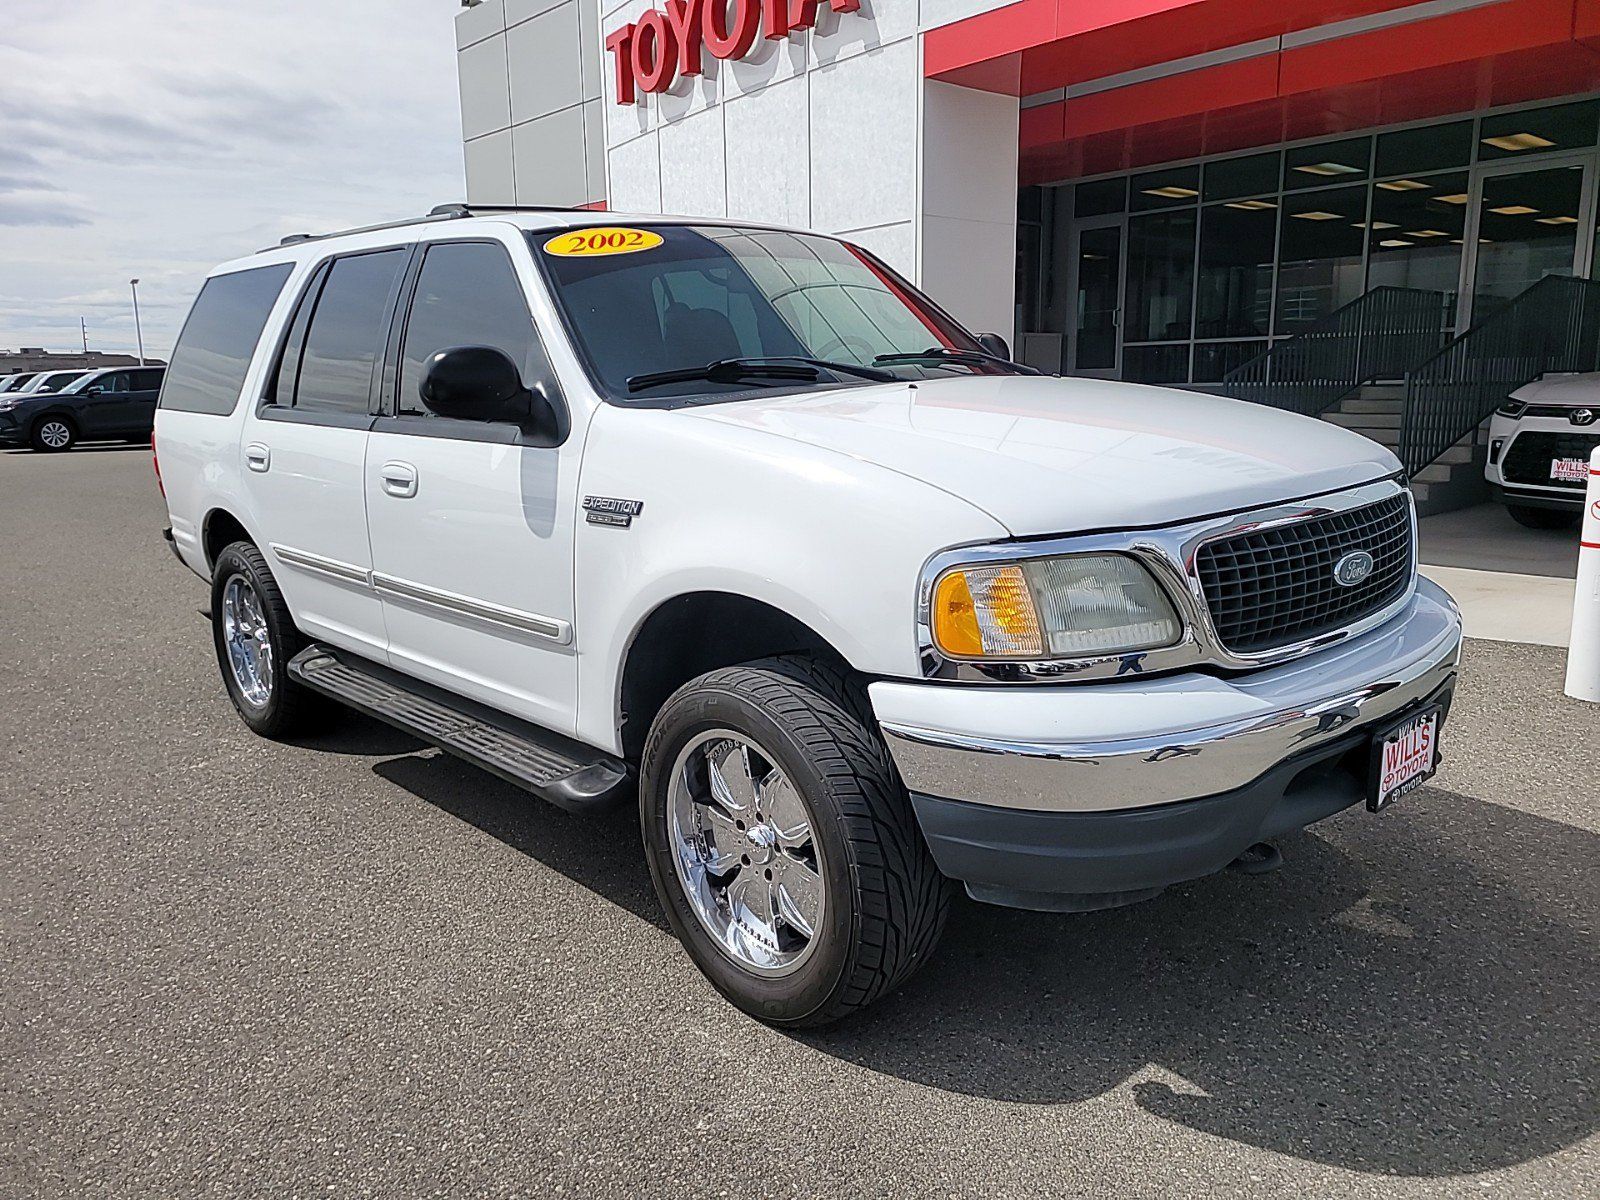 2002 - Ford - Expedition - $5,997